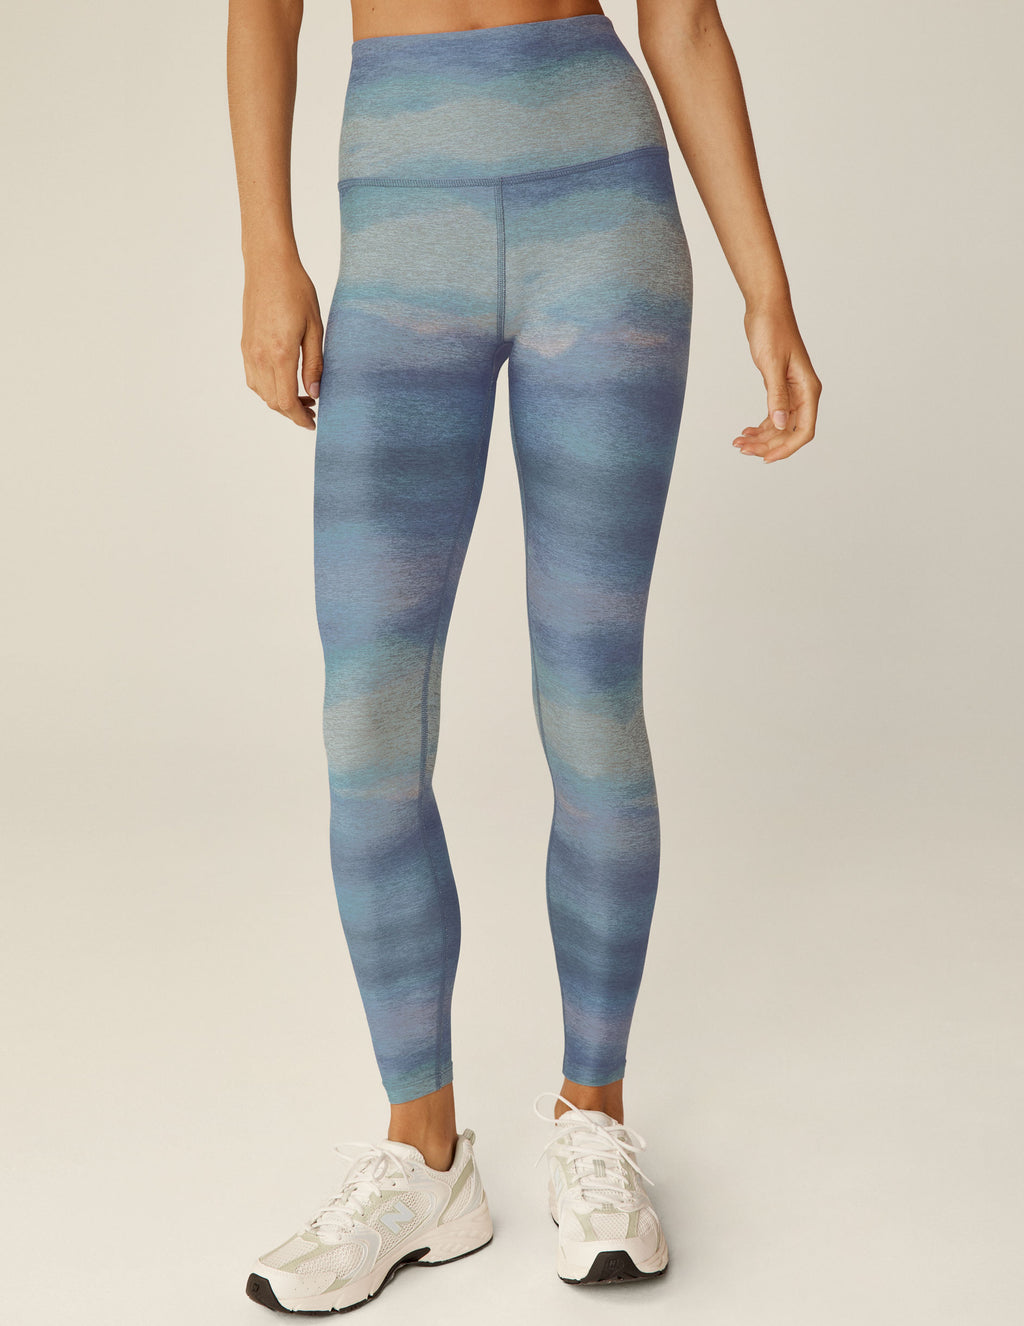 Watercolor Waves SoftMark High Waisted Midi Legging Featured Image